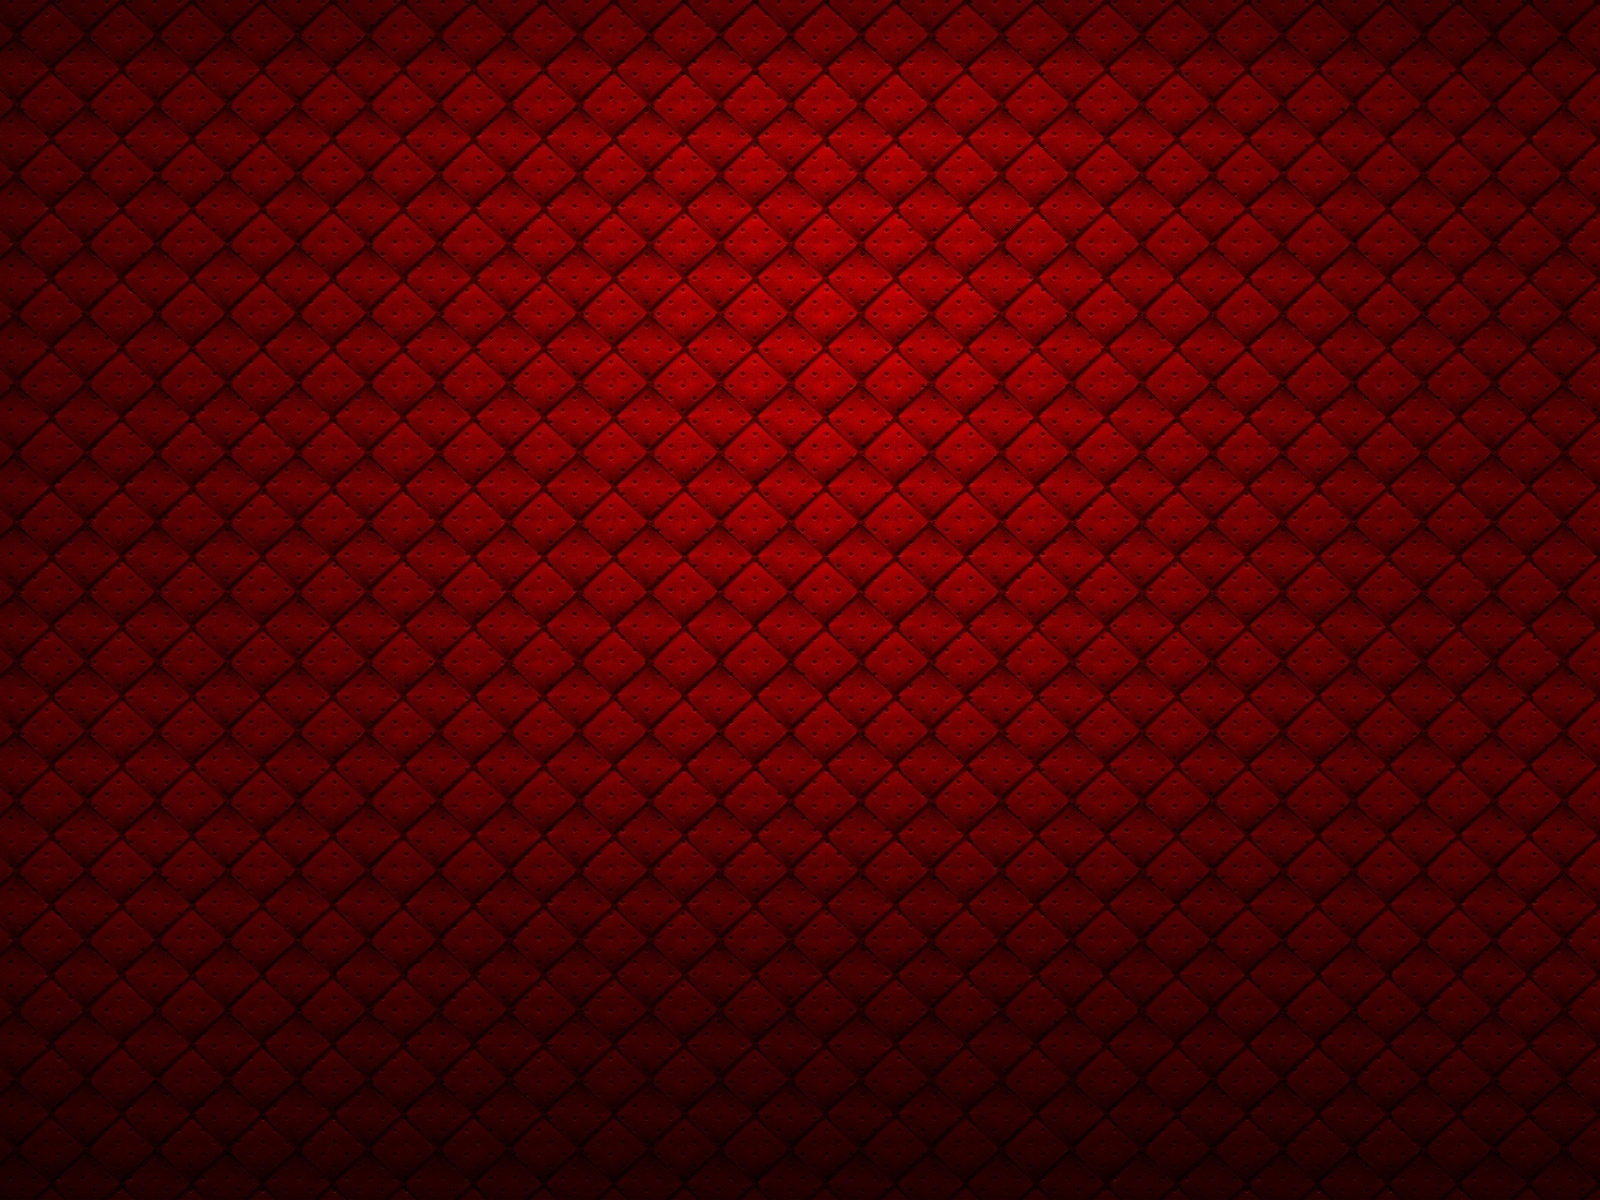 Still in Red for 1600 x 1200 resolution